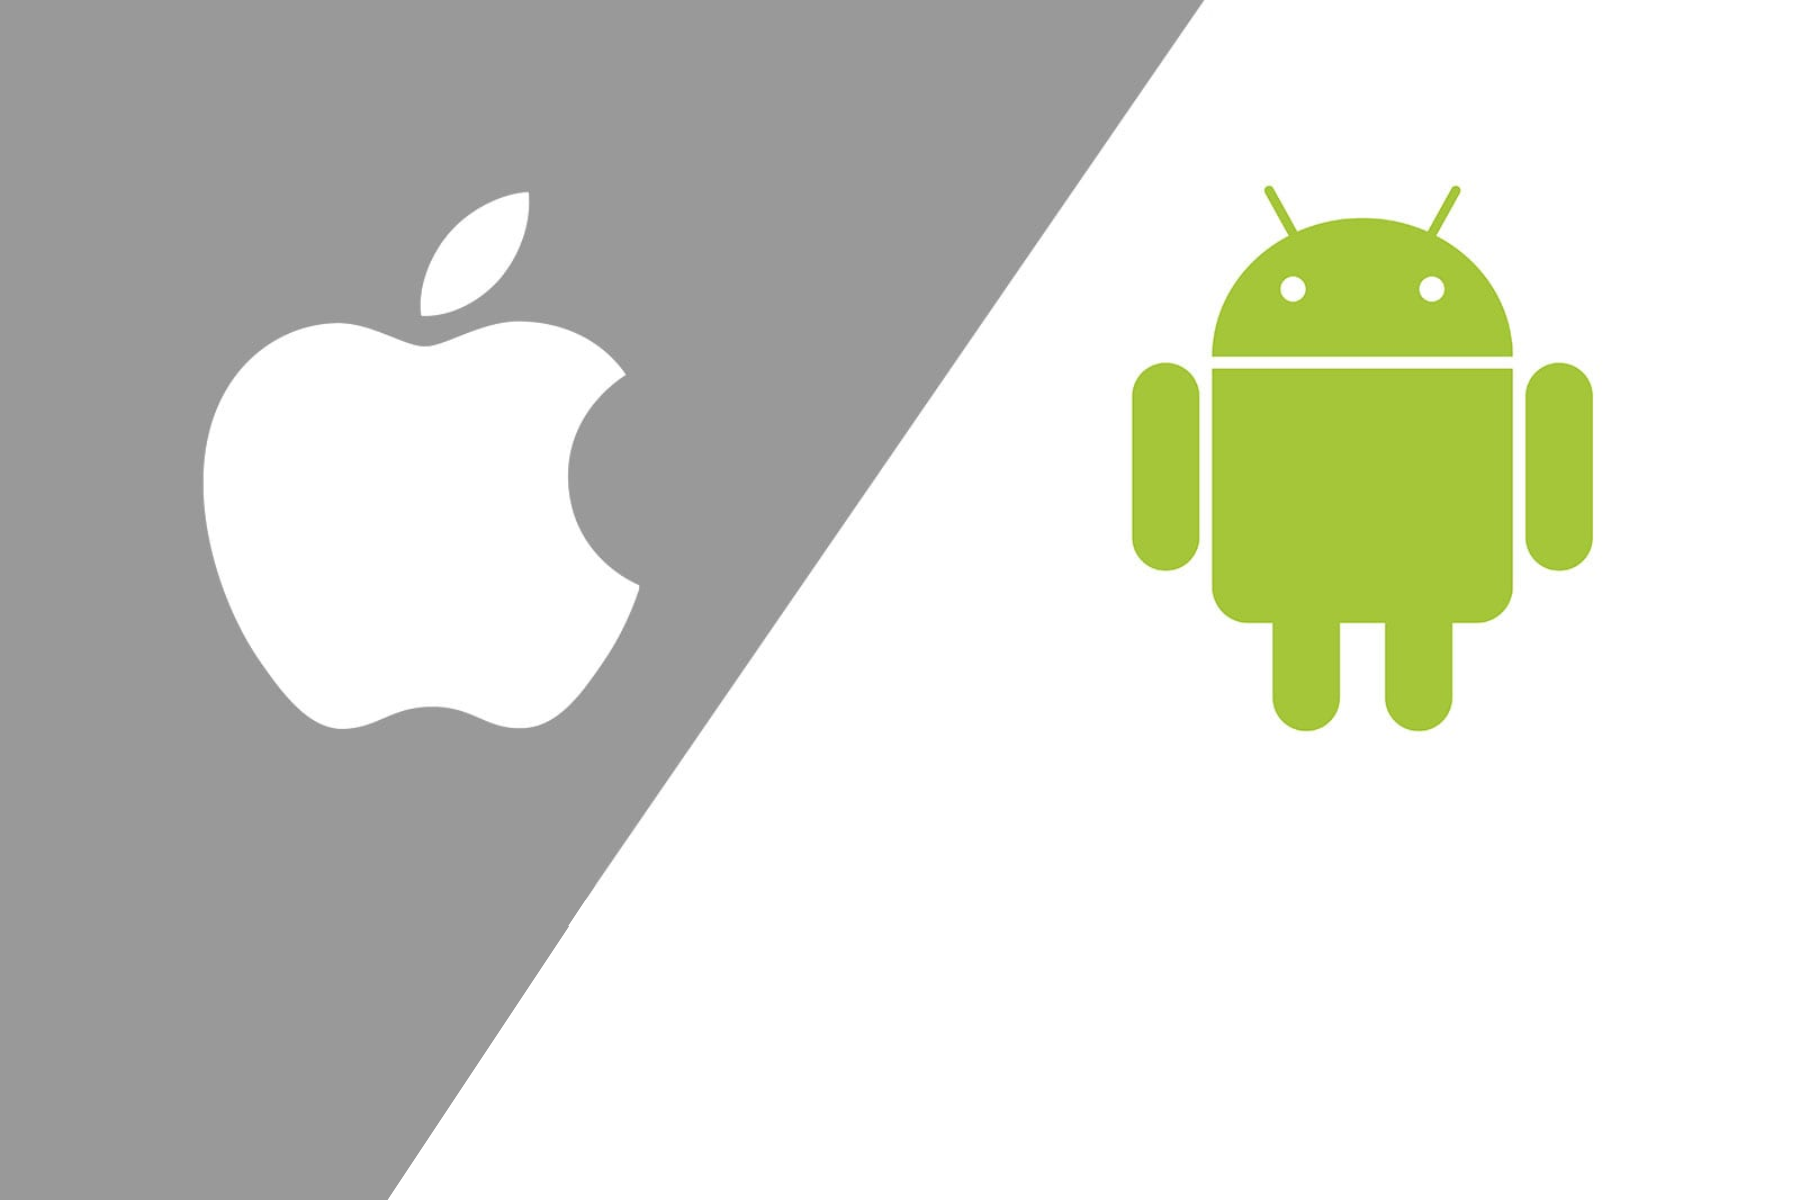 An Apple logo (on the left) and an Android logo (on the right)